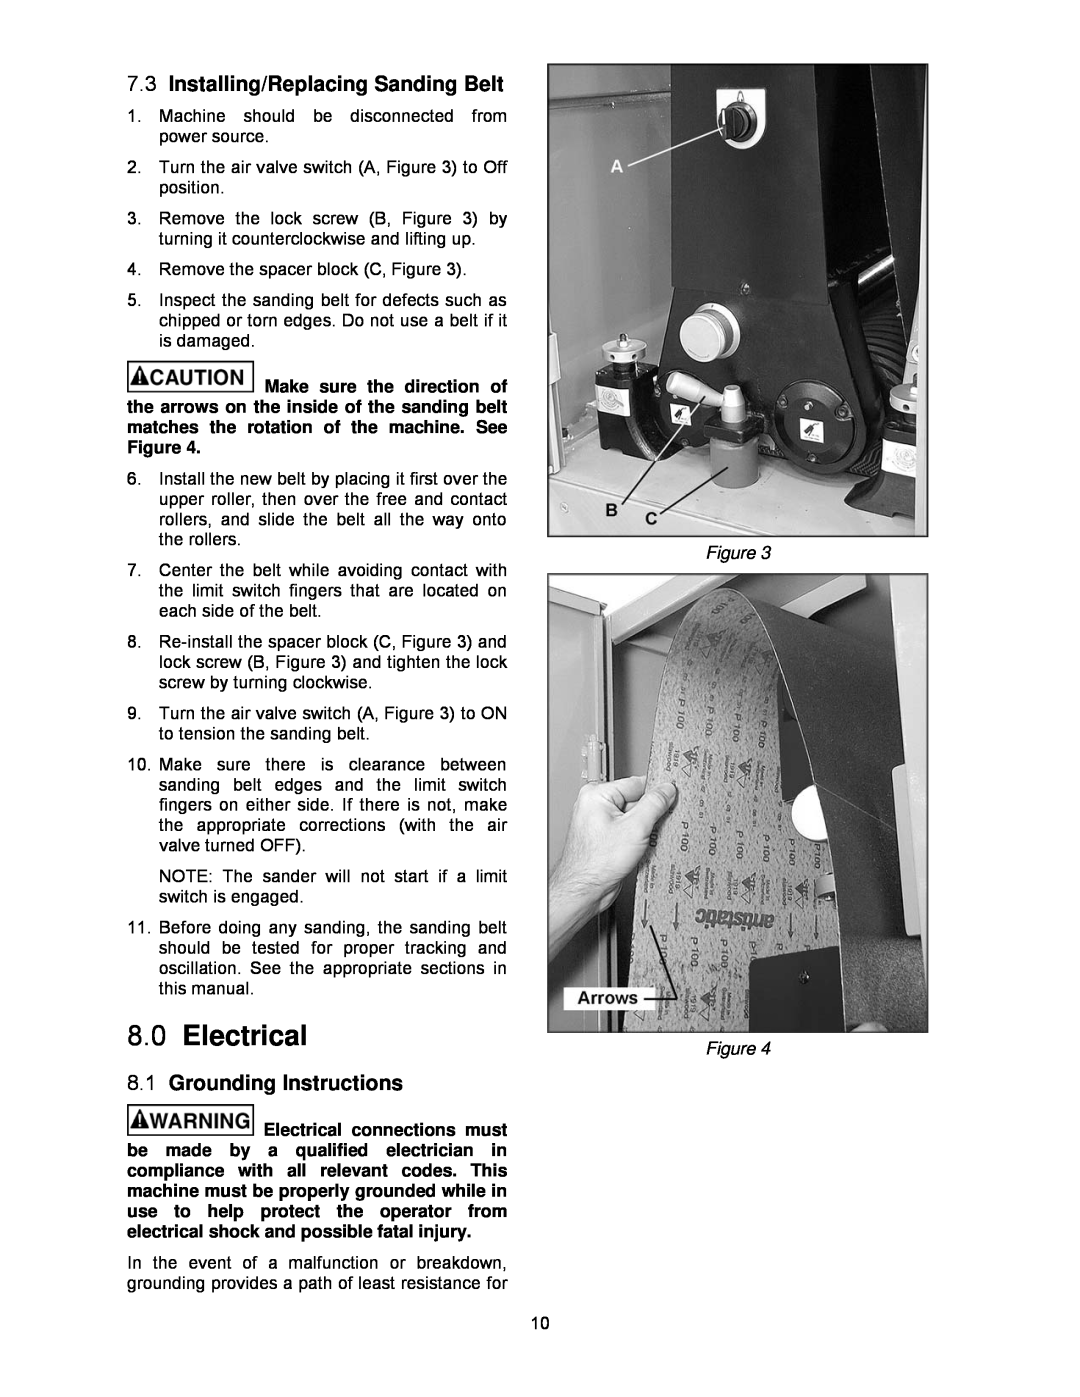 Powermatic WB-25, WB-37, WB-43 operating instructions Electrical, Installing/Replacing Sanding Belt, Grounding Instructions 